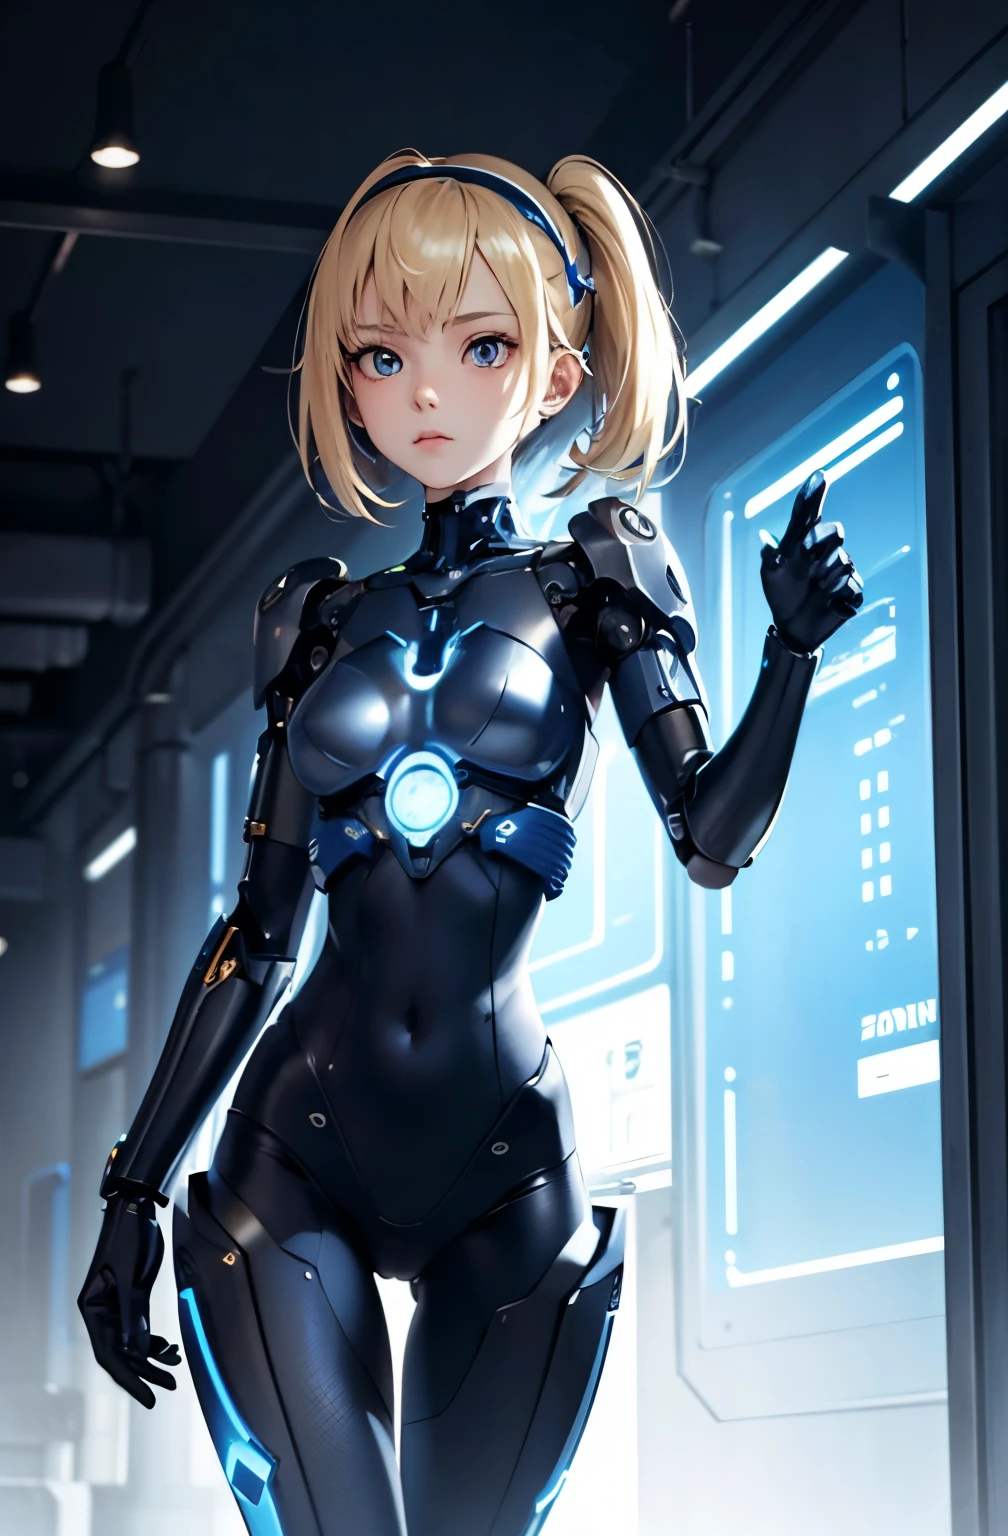 1girl in,Beautiful girl with blue cyborg body,cool expression,Accurately drawn face,Blonde Shorthair,headband made from mechanical parts,her ears are mechanical,A slender,tre anatomically correct,Precise cyborg body made of blue metal parts, purah, and mechanical parts..,Joints are mechanical,Glowing parts,precision mechanical fingers,cables,Western Shot,Knee up,In the factory of the future,​masterpiece,hiquality,precise,